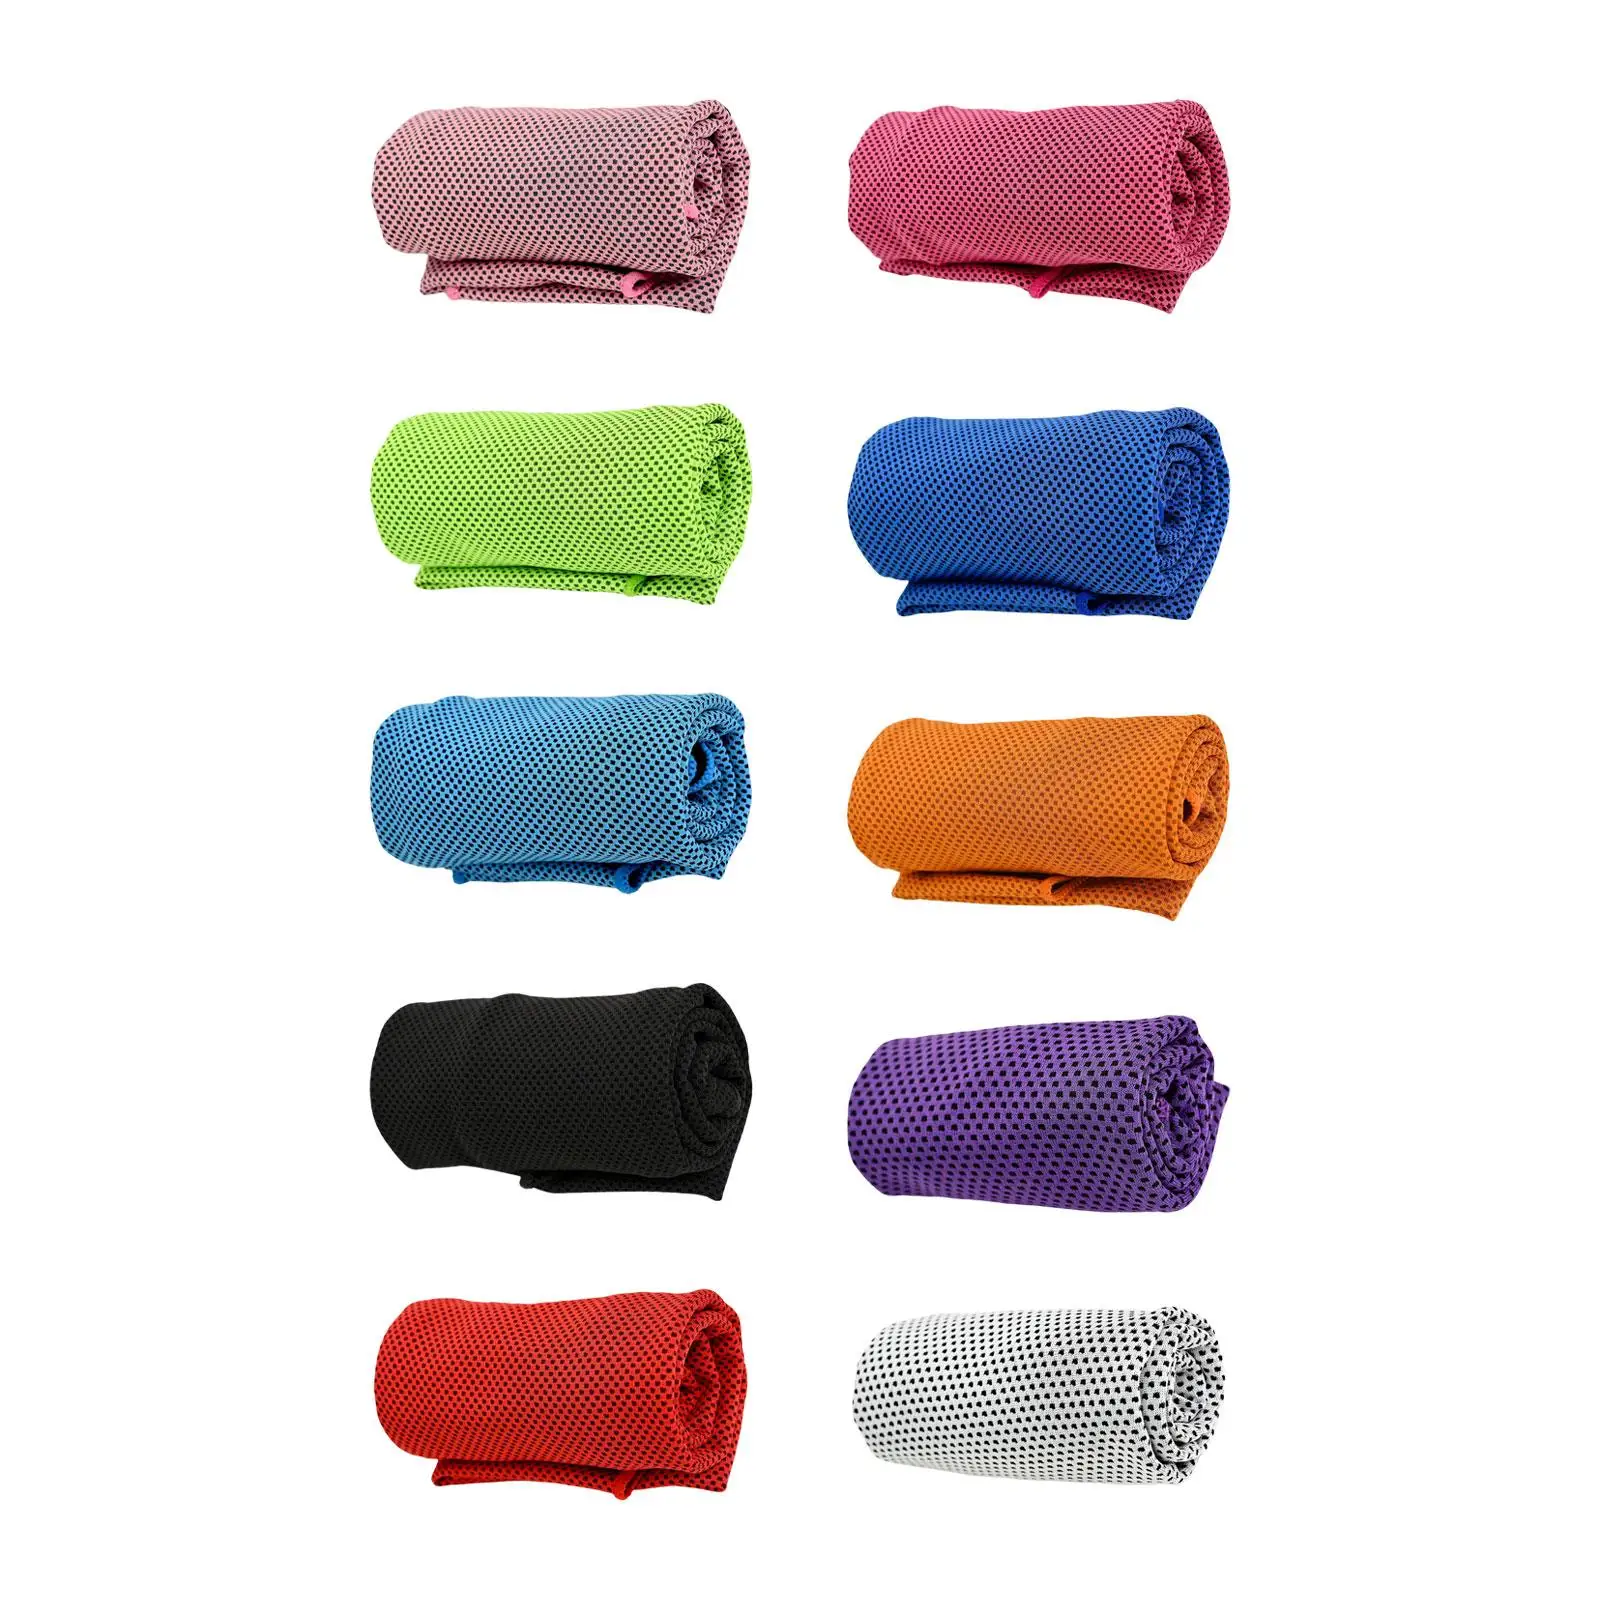 Soft Breathable Chilly Towel 12